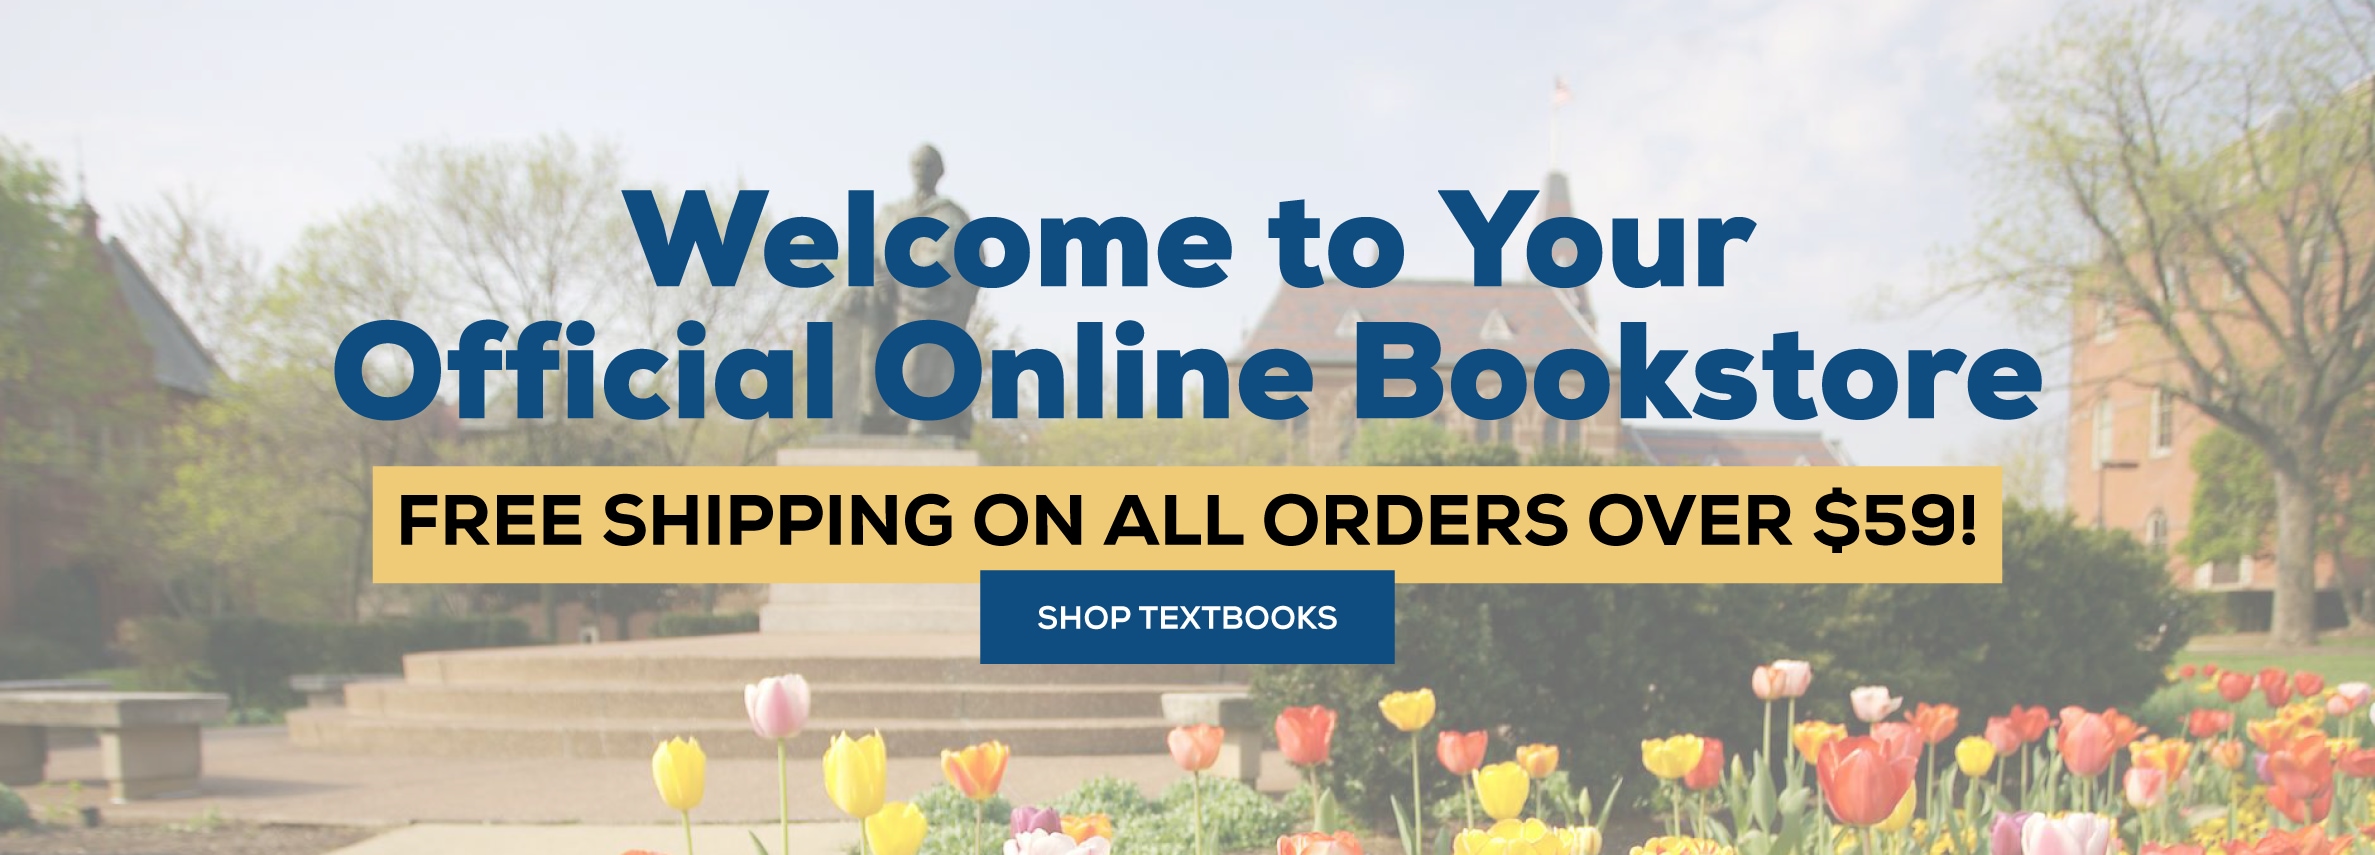 Welcome to your official online bookstore. Free shipping on all orders over $59! Shop textbooks